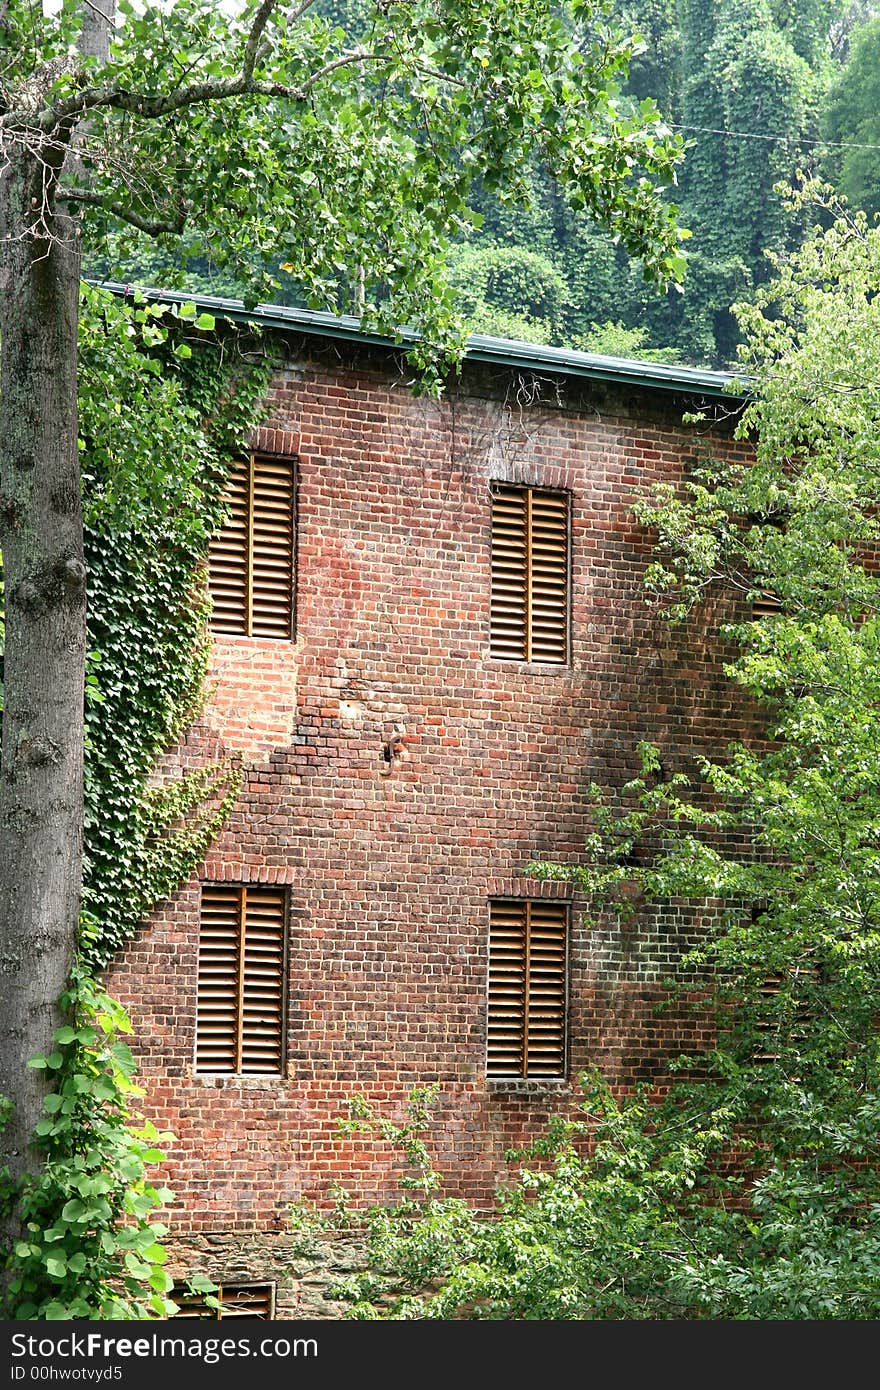 An old brick mill covered with vines. An old brick mill covered with vines